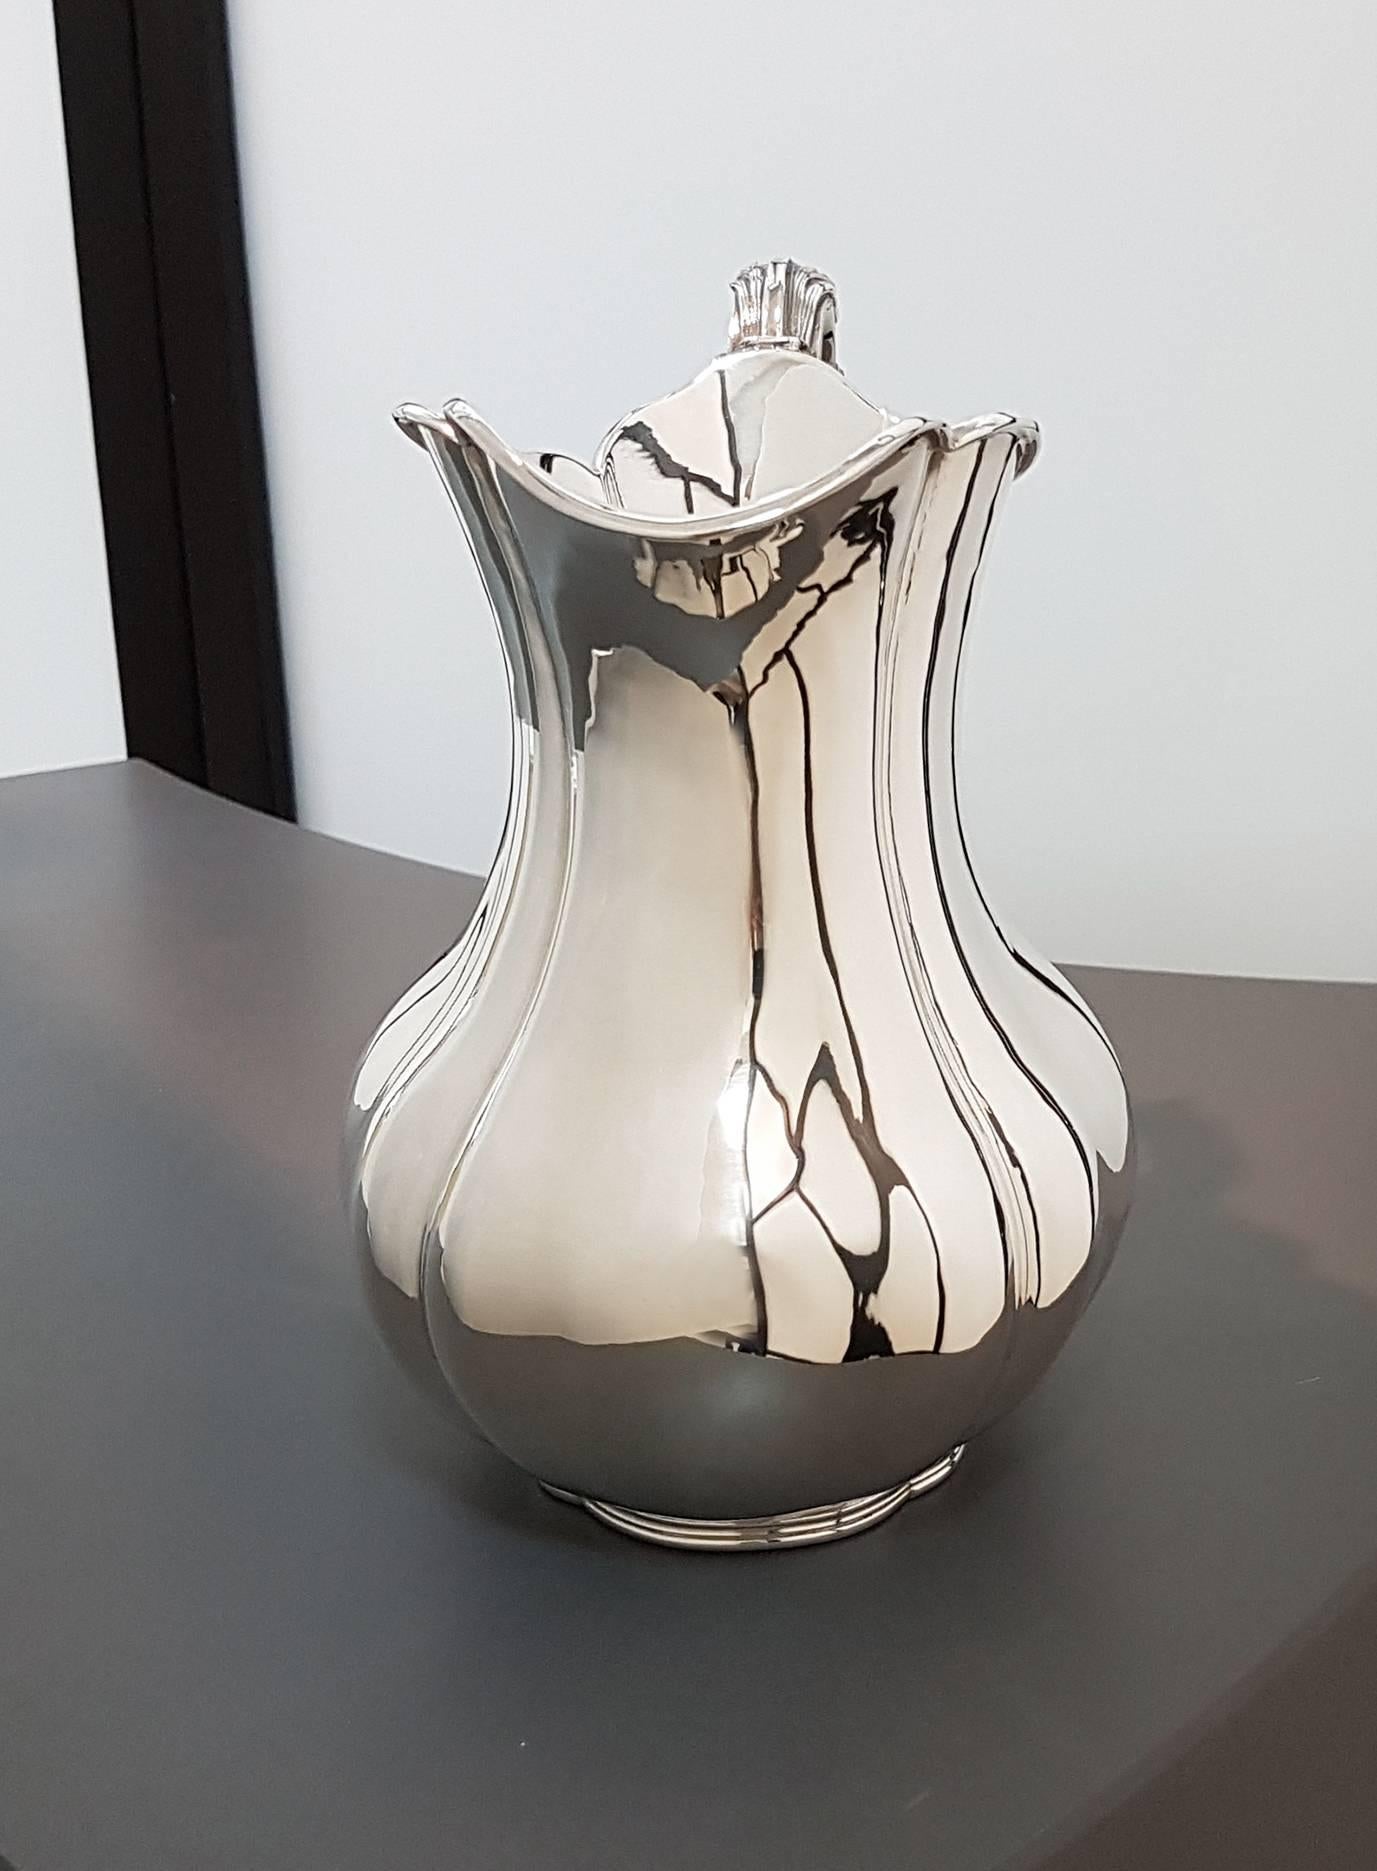 Sterling silver Italian Baroque style jug.
The jug body is smooth oval with four grooves typical of Baroque style.
The handle was made in melting and embellished with volute, also typical of the Baroque style.
780 grams

 